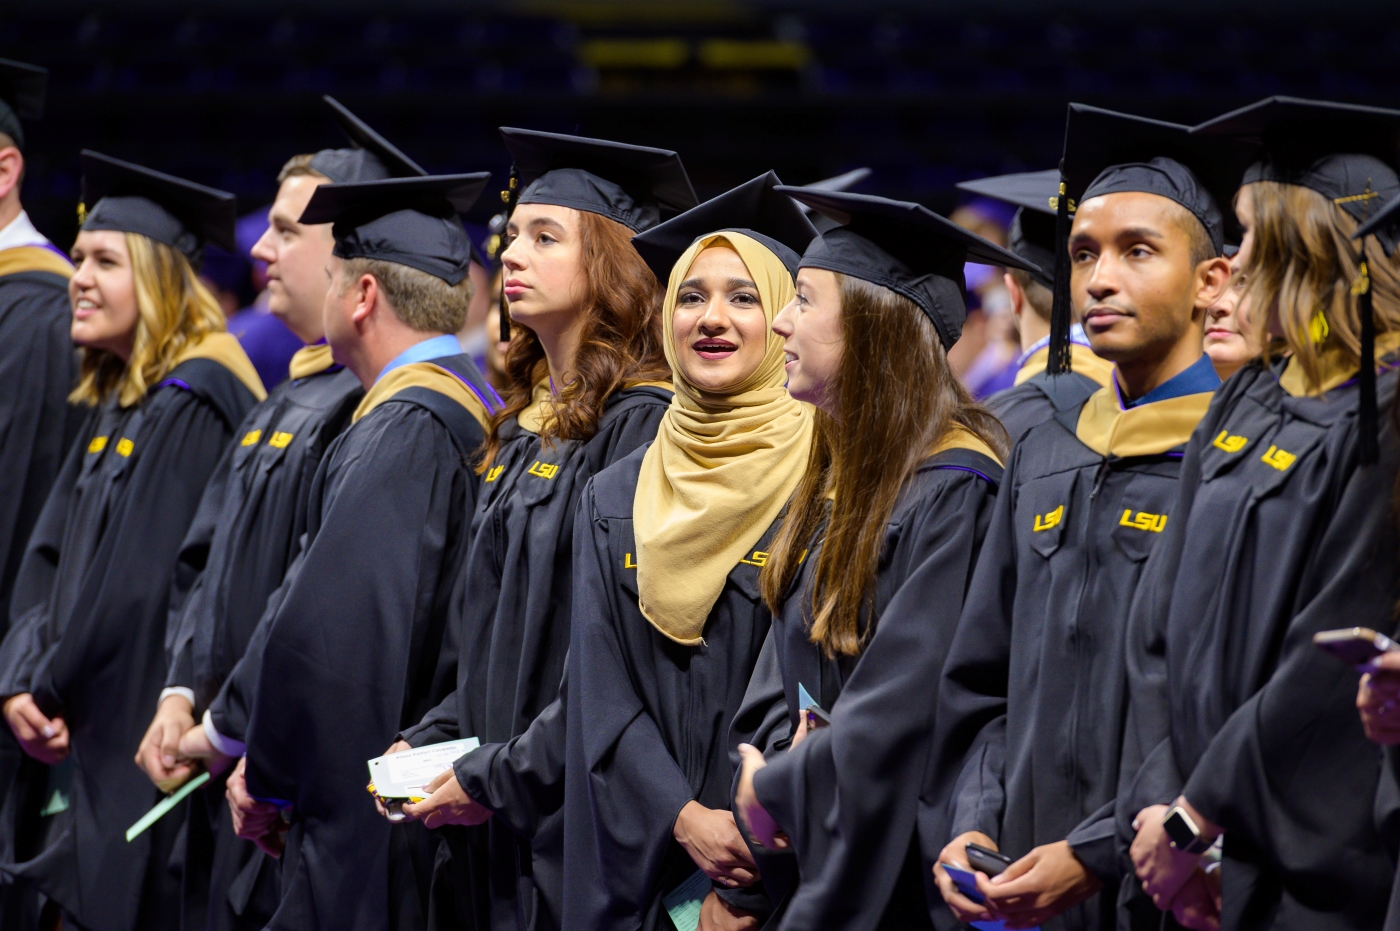 Line of students in caps and gowns at graduation